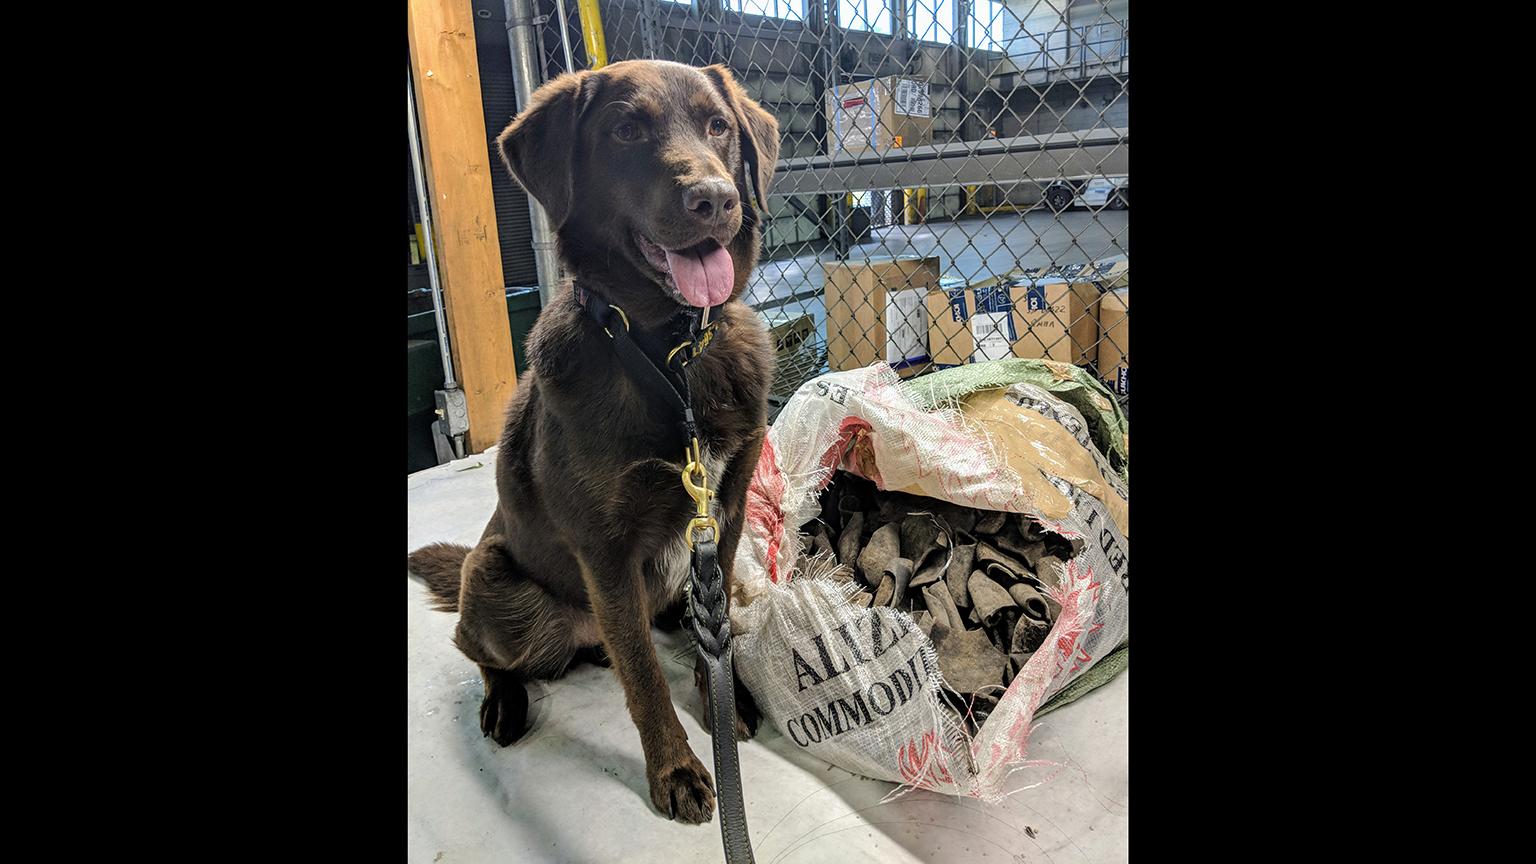 Rusty, an agriculture detection dog, sits next to contraband found on July 24, 2018 at an Air France cargo warehouse at O’Hare International Airport. (Courtesy U.S. Customs and Border Protection)